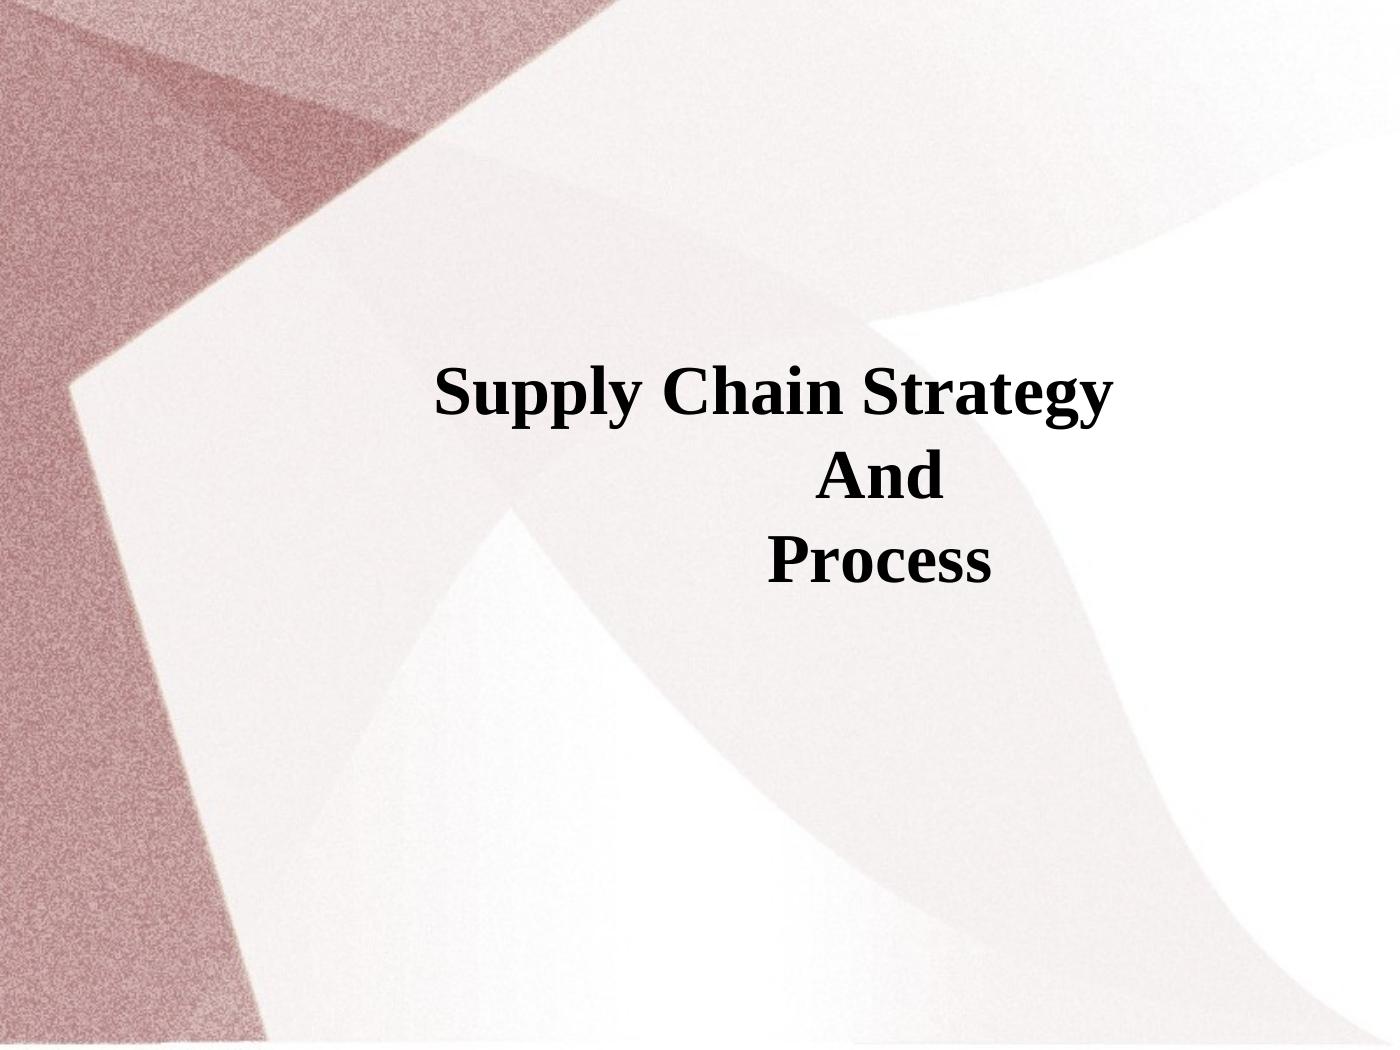 Supply Chain Strategy and Processes_1